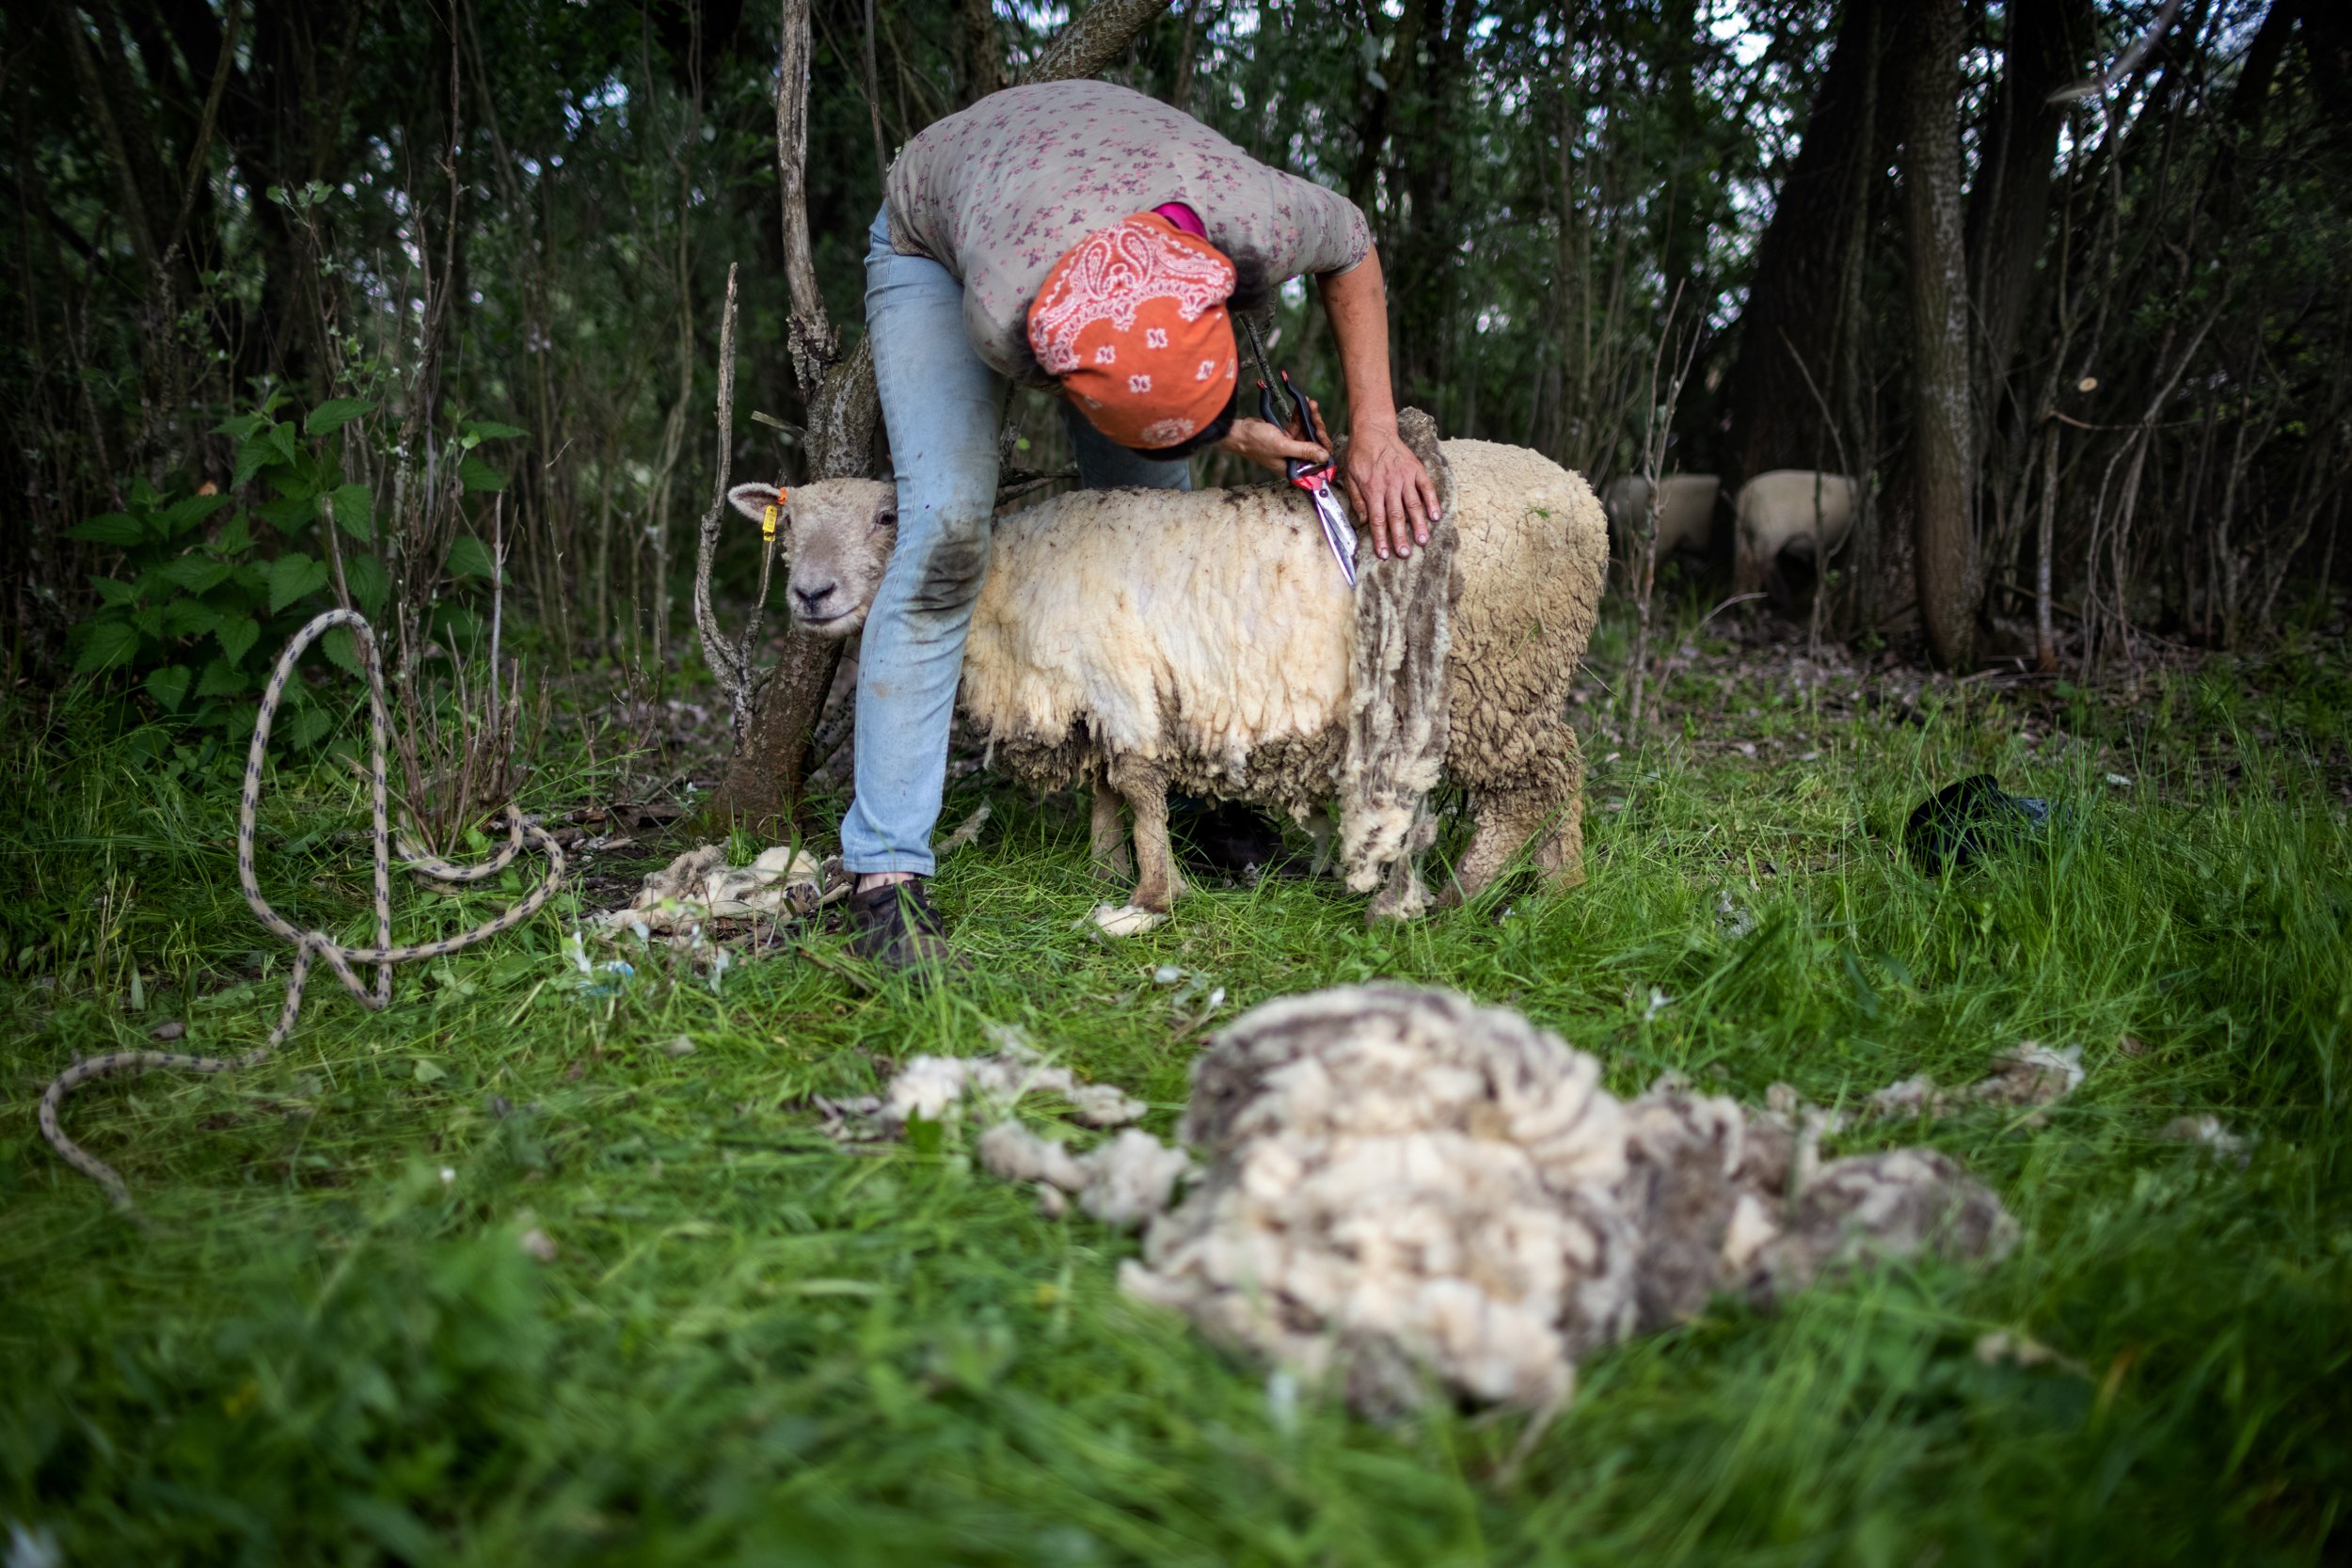  Etelka shearing her sheep gently, by hand, in Nagyszékely on May 10, 2022. 